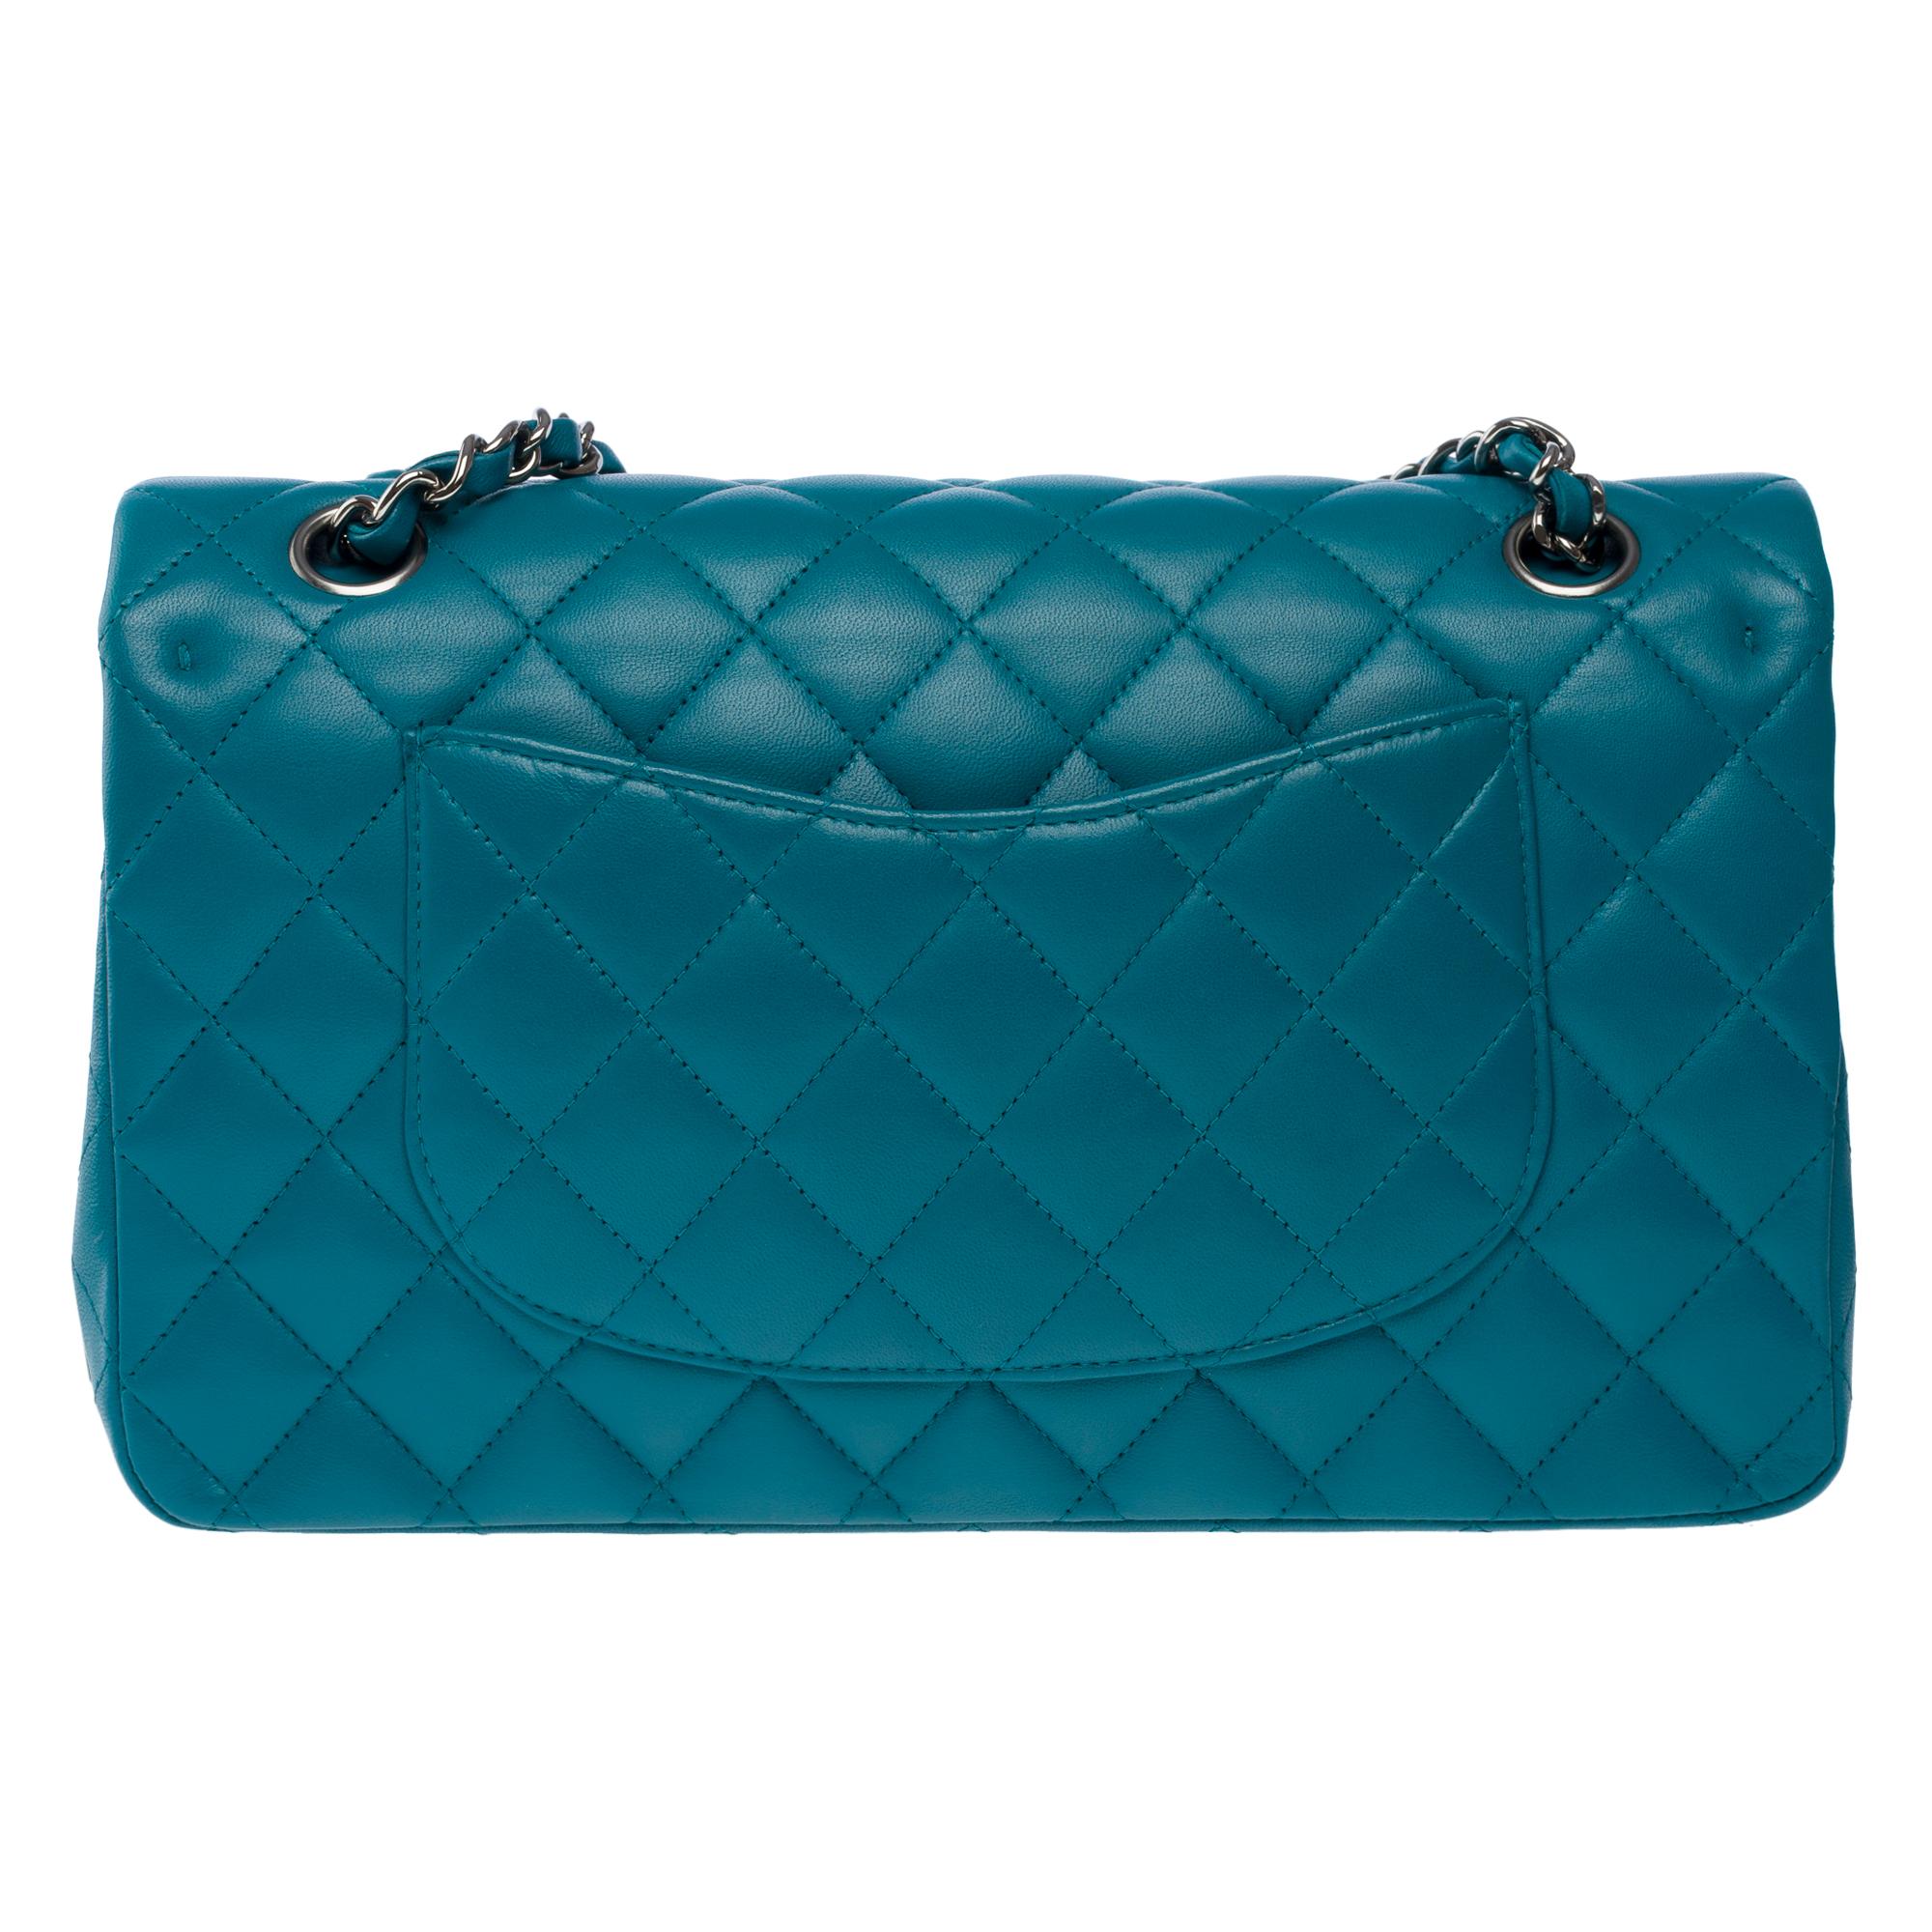 Women's Chanel Timeless double flap shoulder bag in Turquoise quilted lamb leather, BSHW For Sale